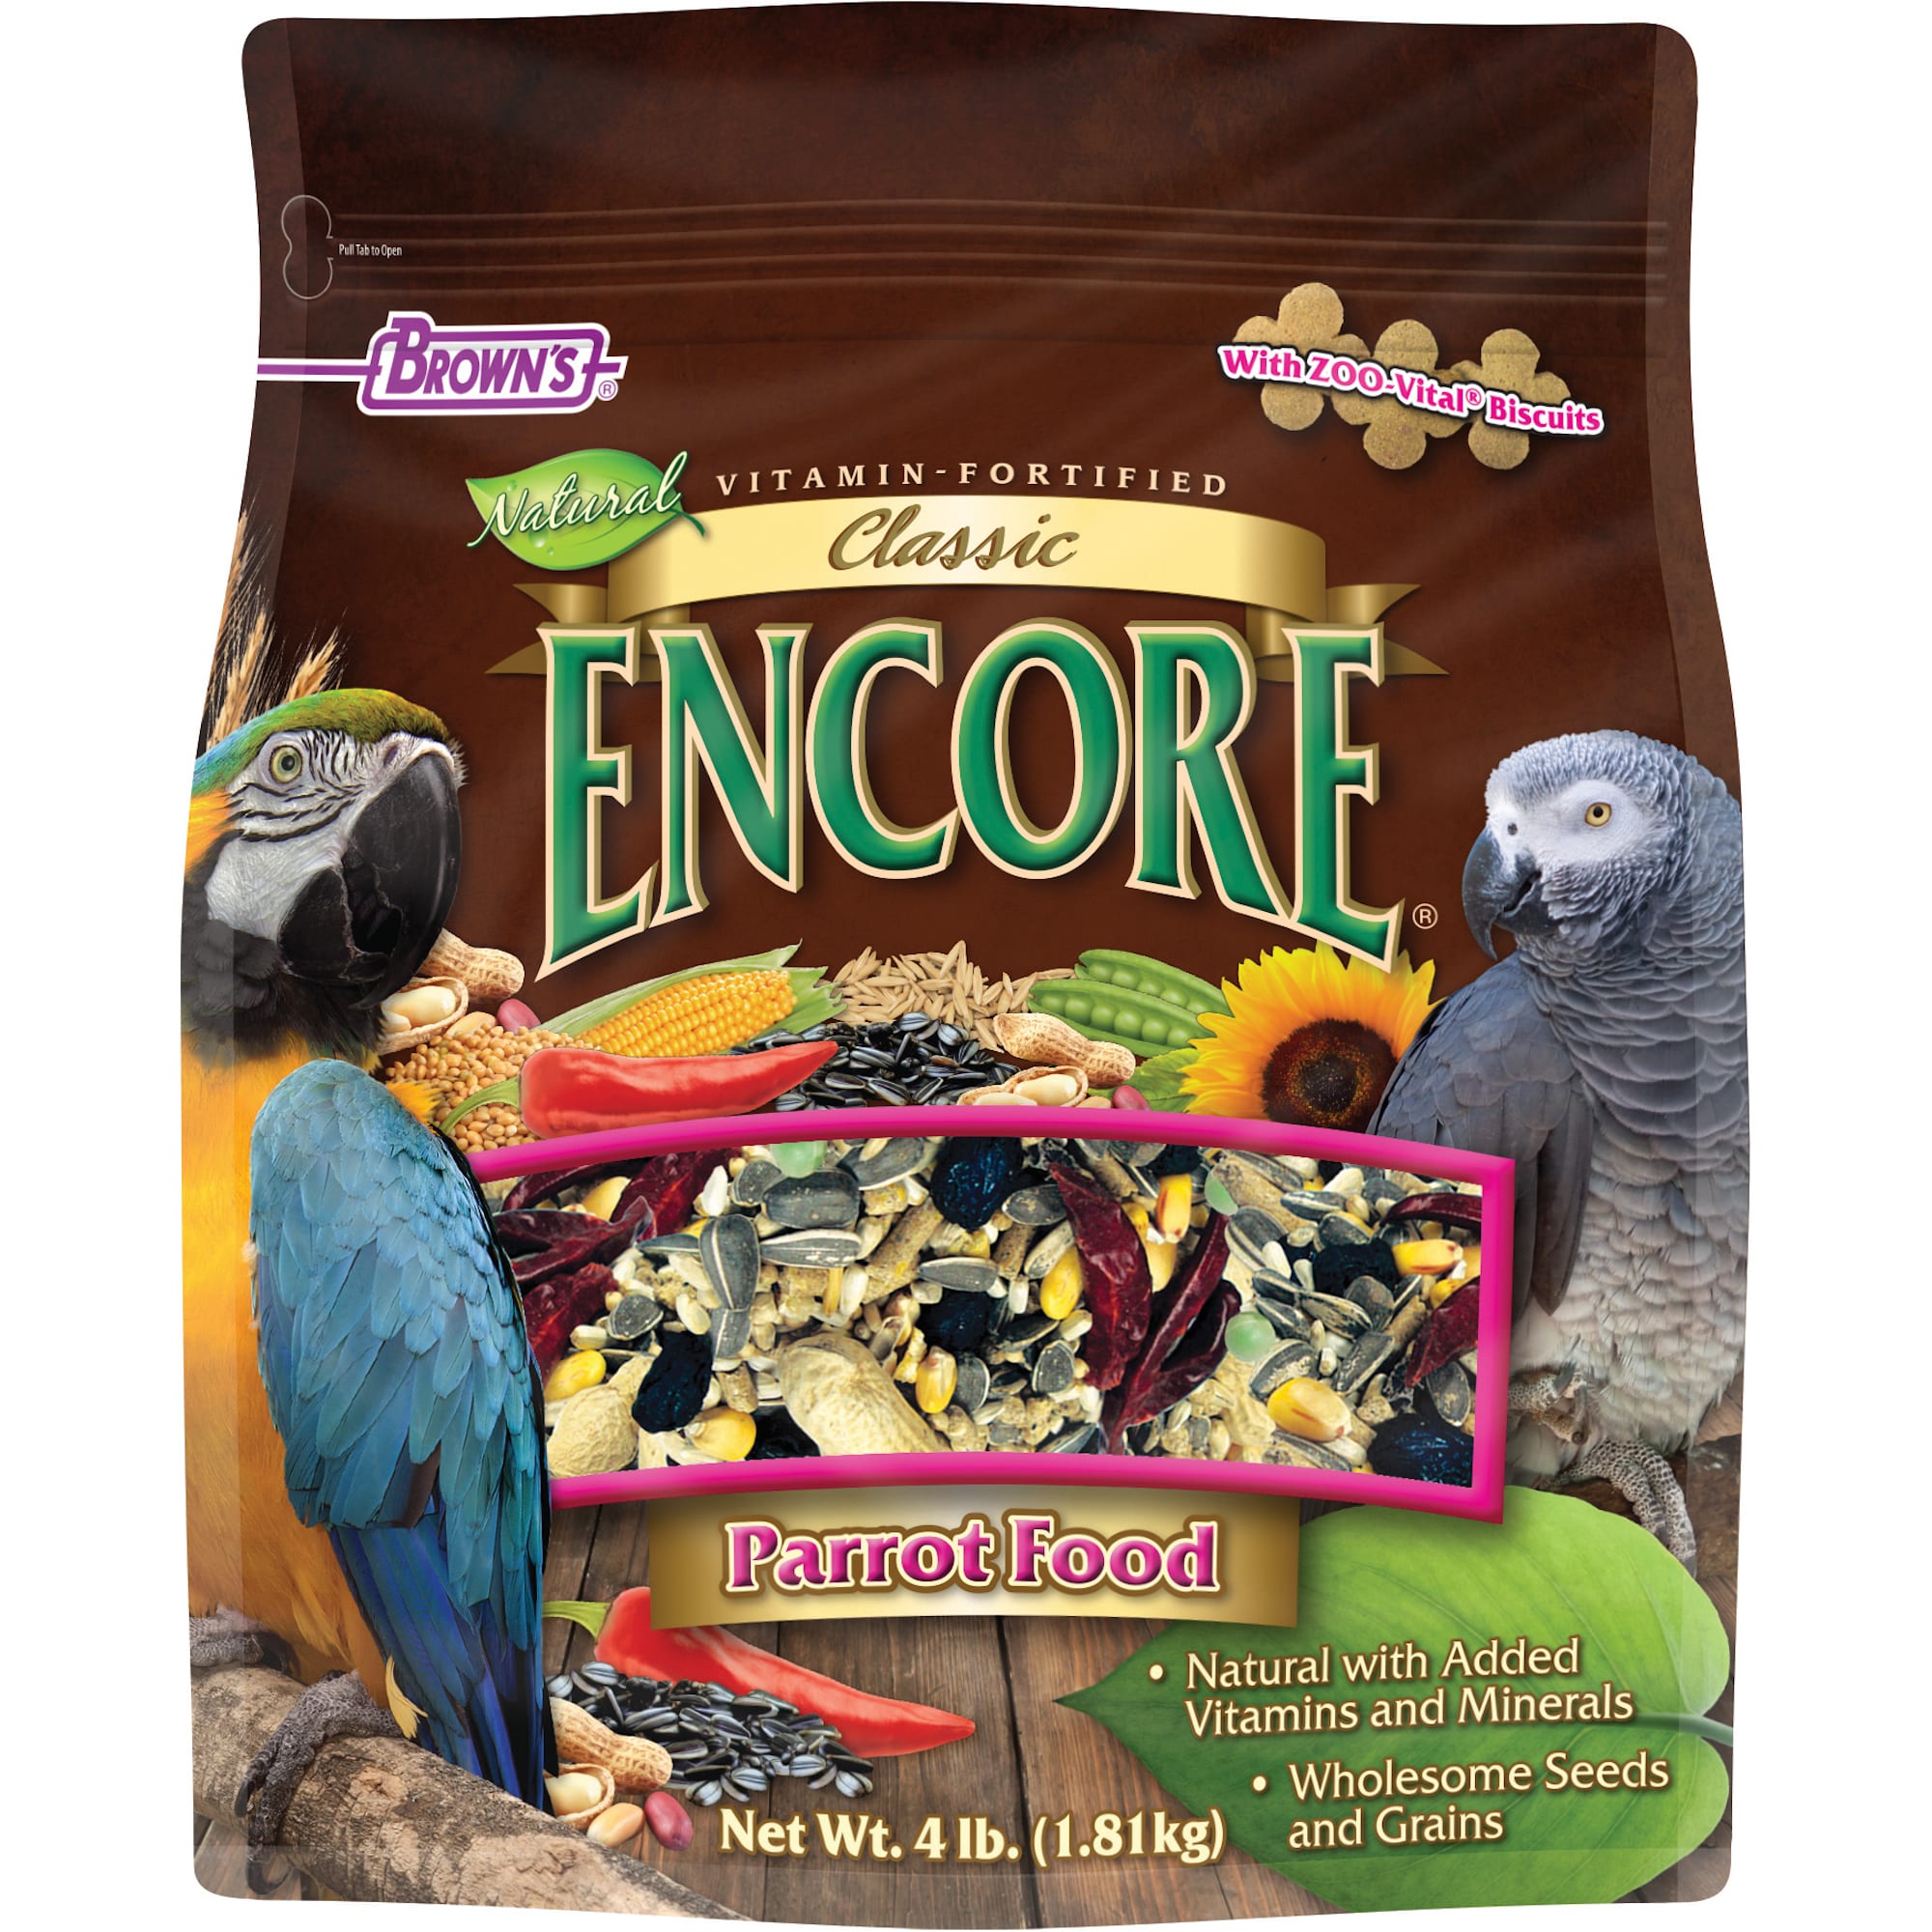 Photos - Bird Food Browns Brown's Brown's Encore Classic Parrot Food, 4 lbs., 4 lbs 54020-7 